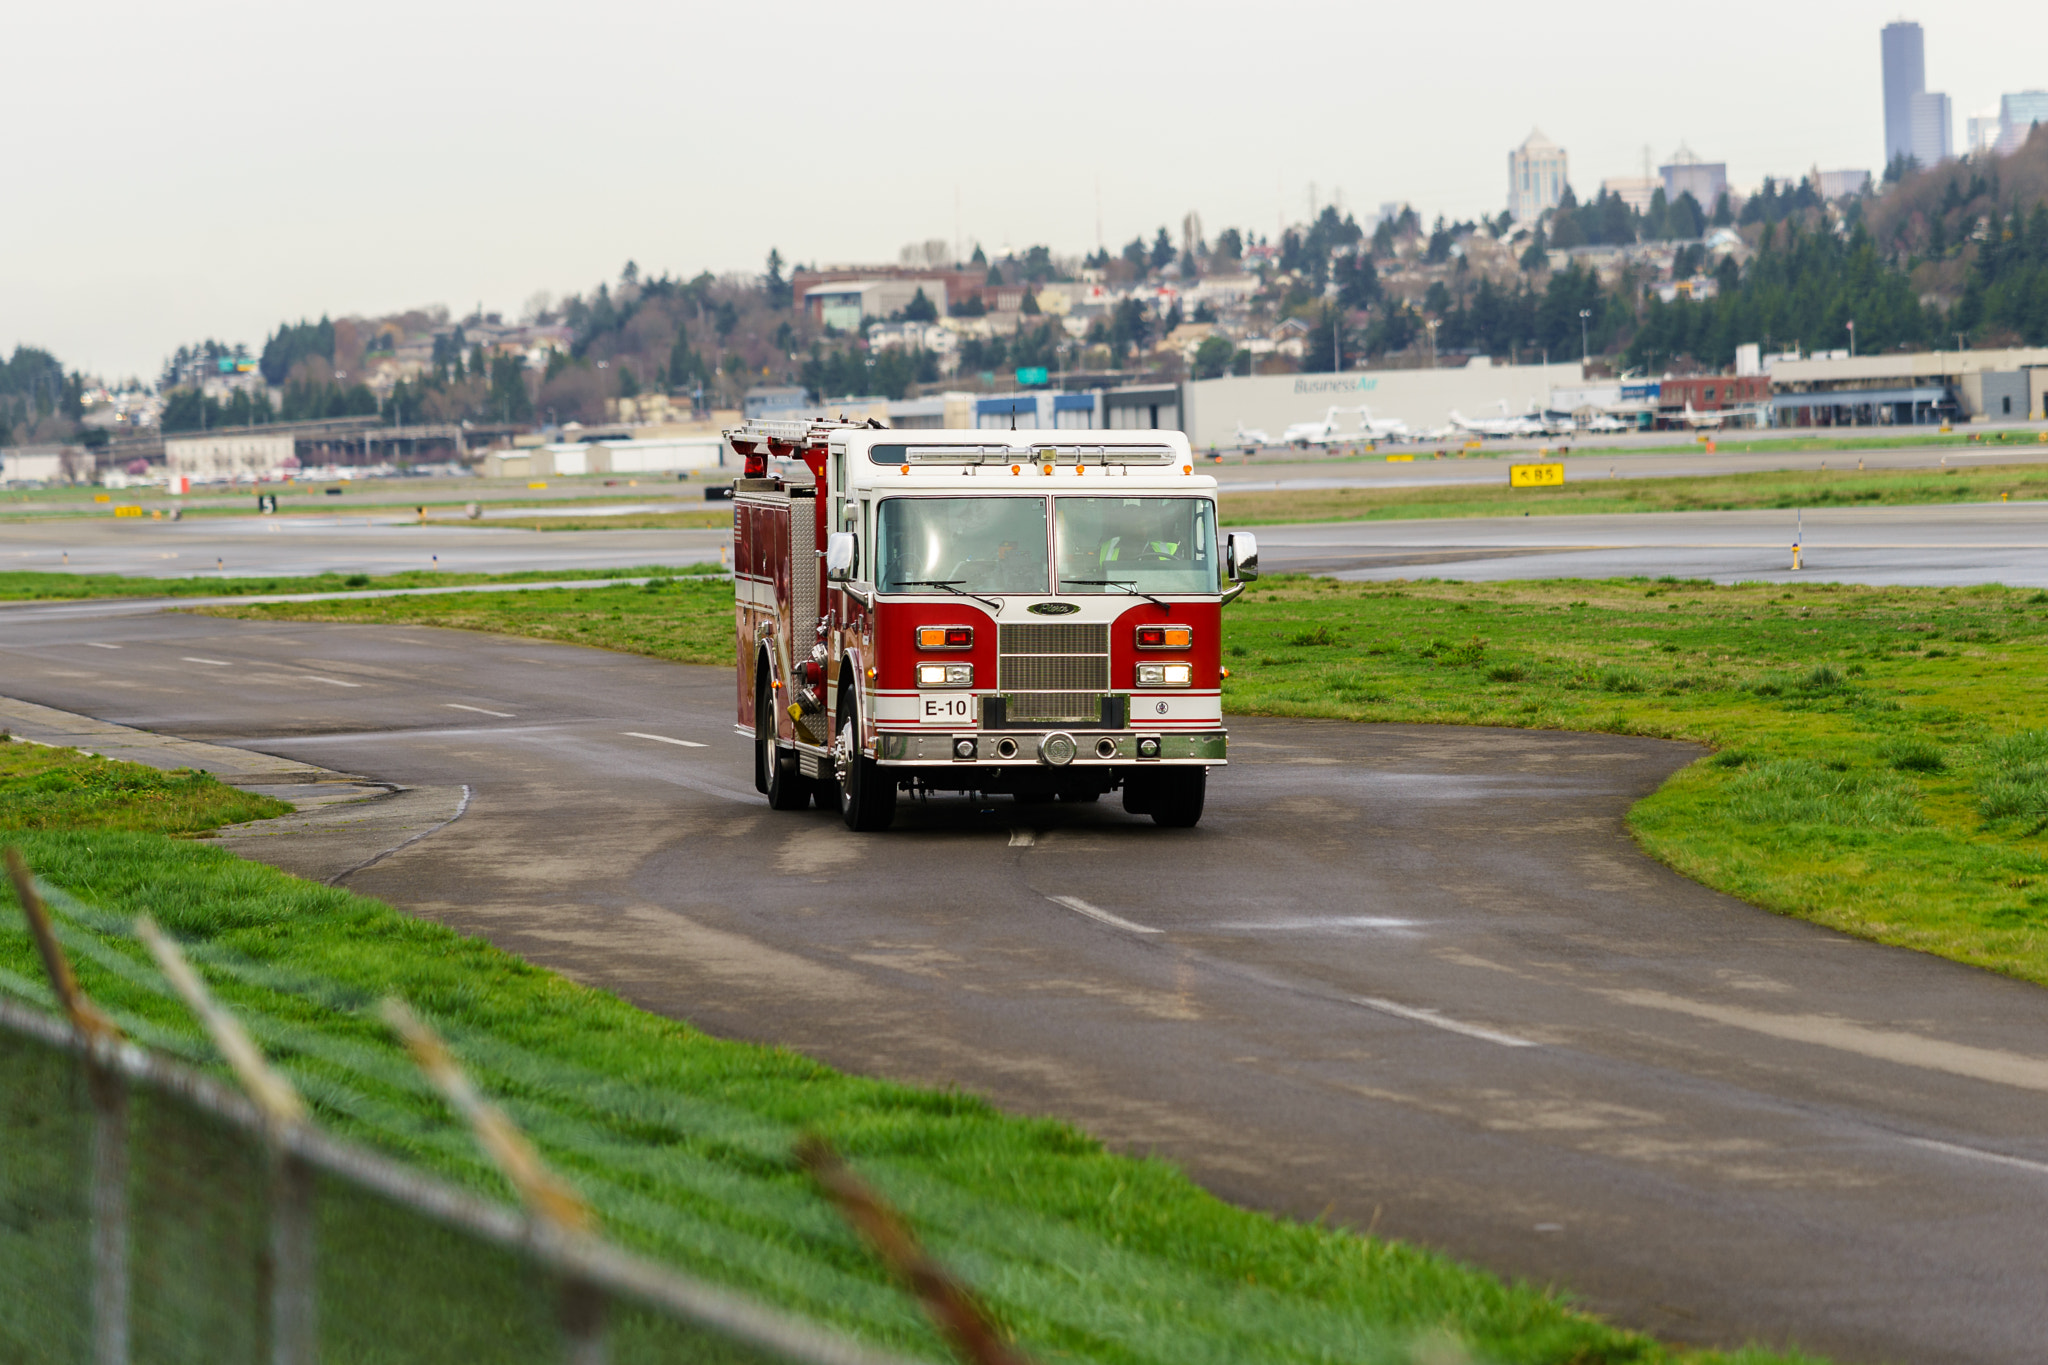 Sony a99 II sample photo. Boeing engine 10 arriving for the festivities. photography